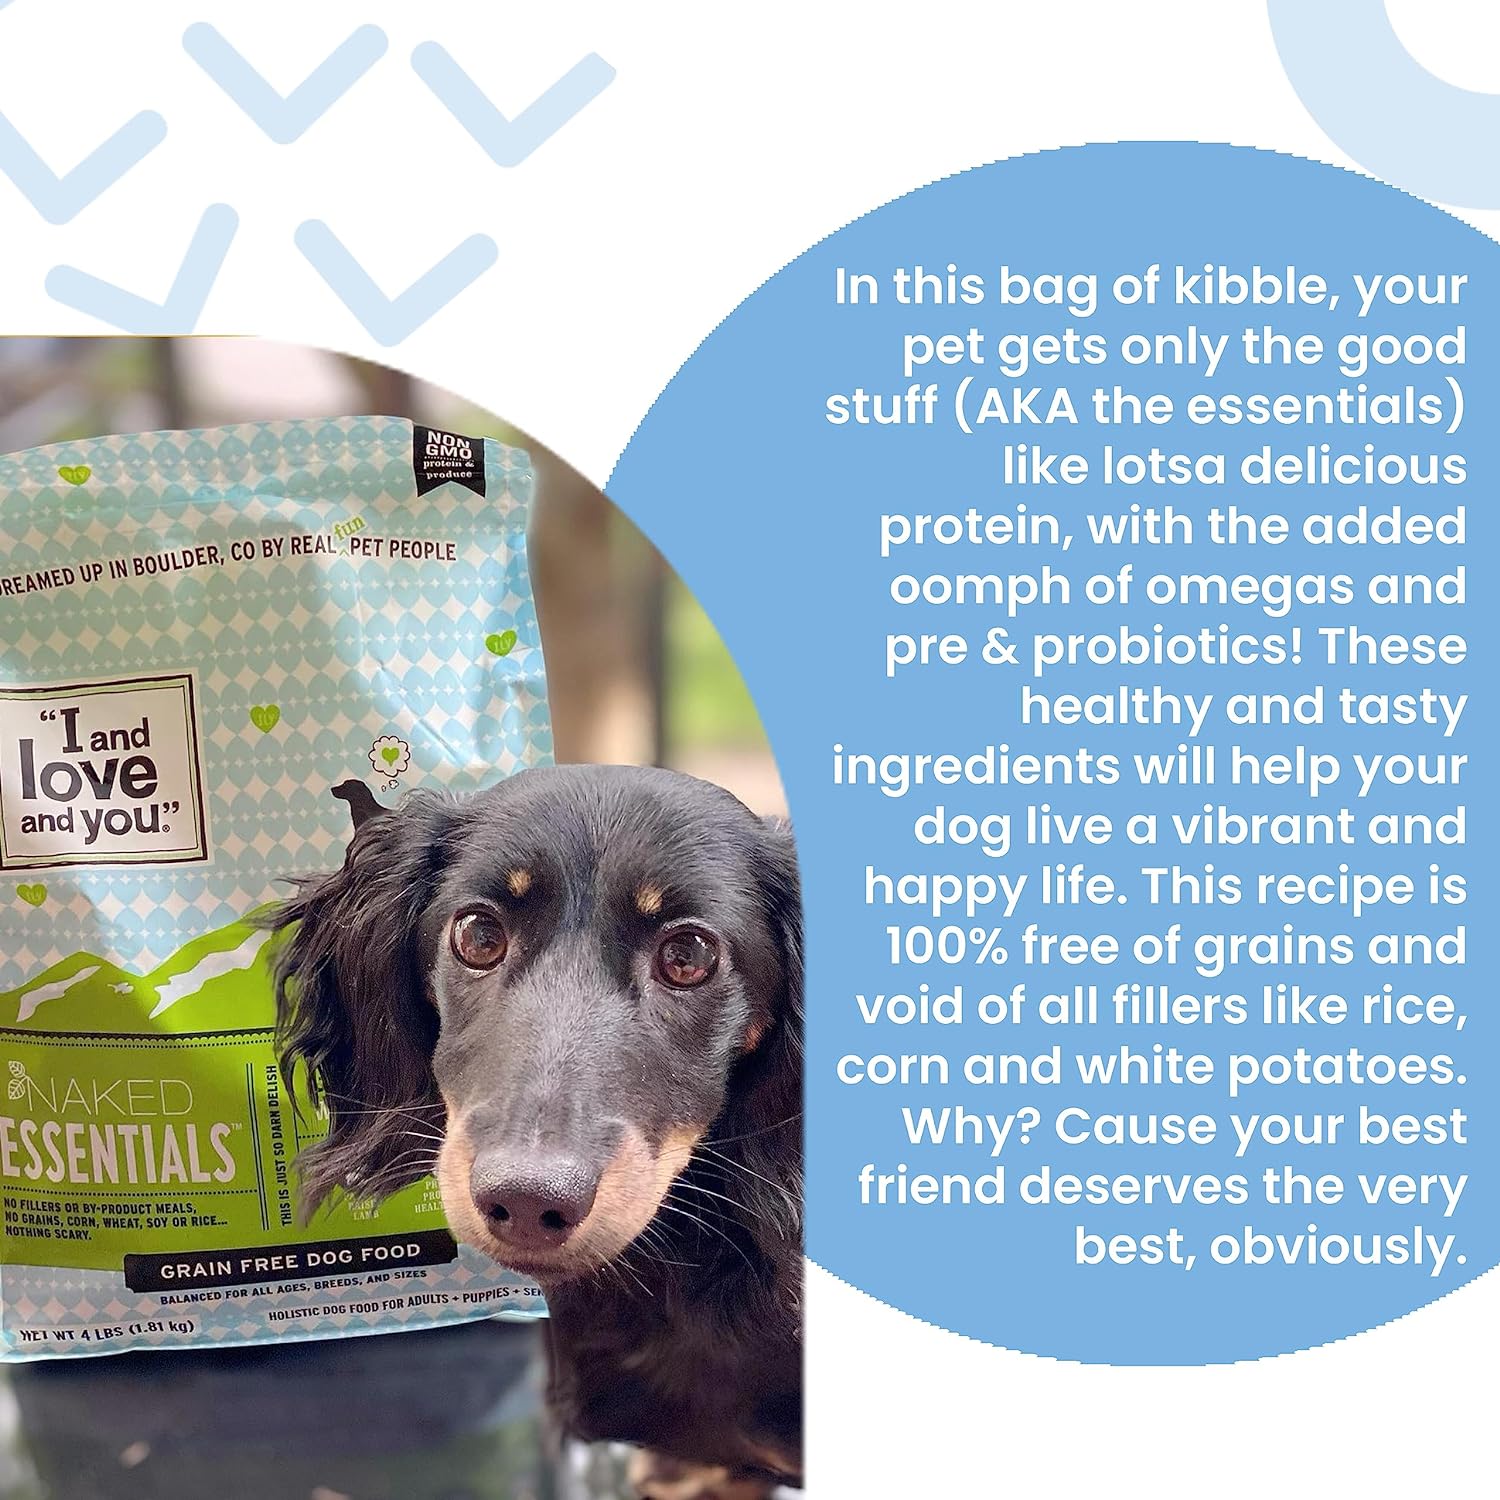 I and Love and You Naked Essentials Grain-Free with Lamb + Bison Dry Dog Food – Gallery Image 4